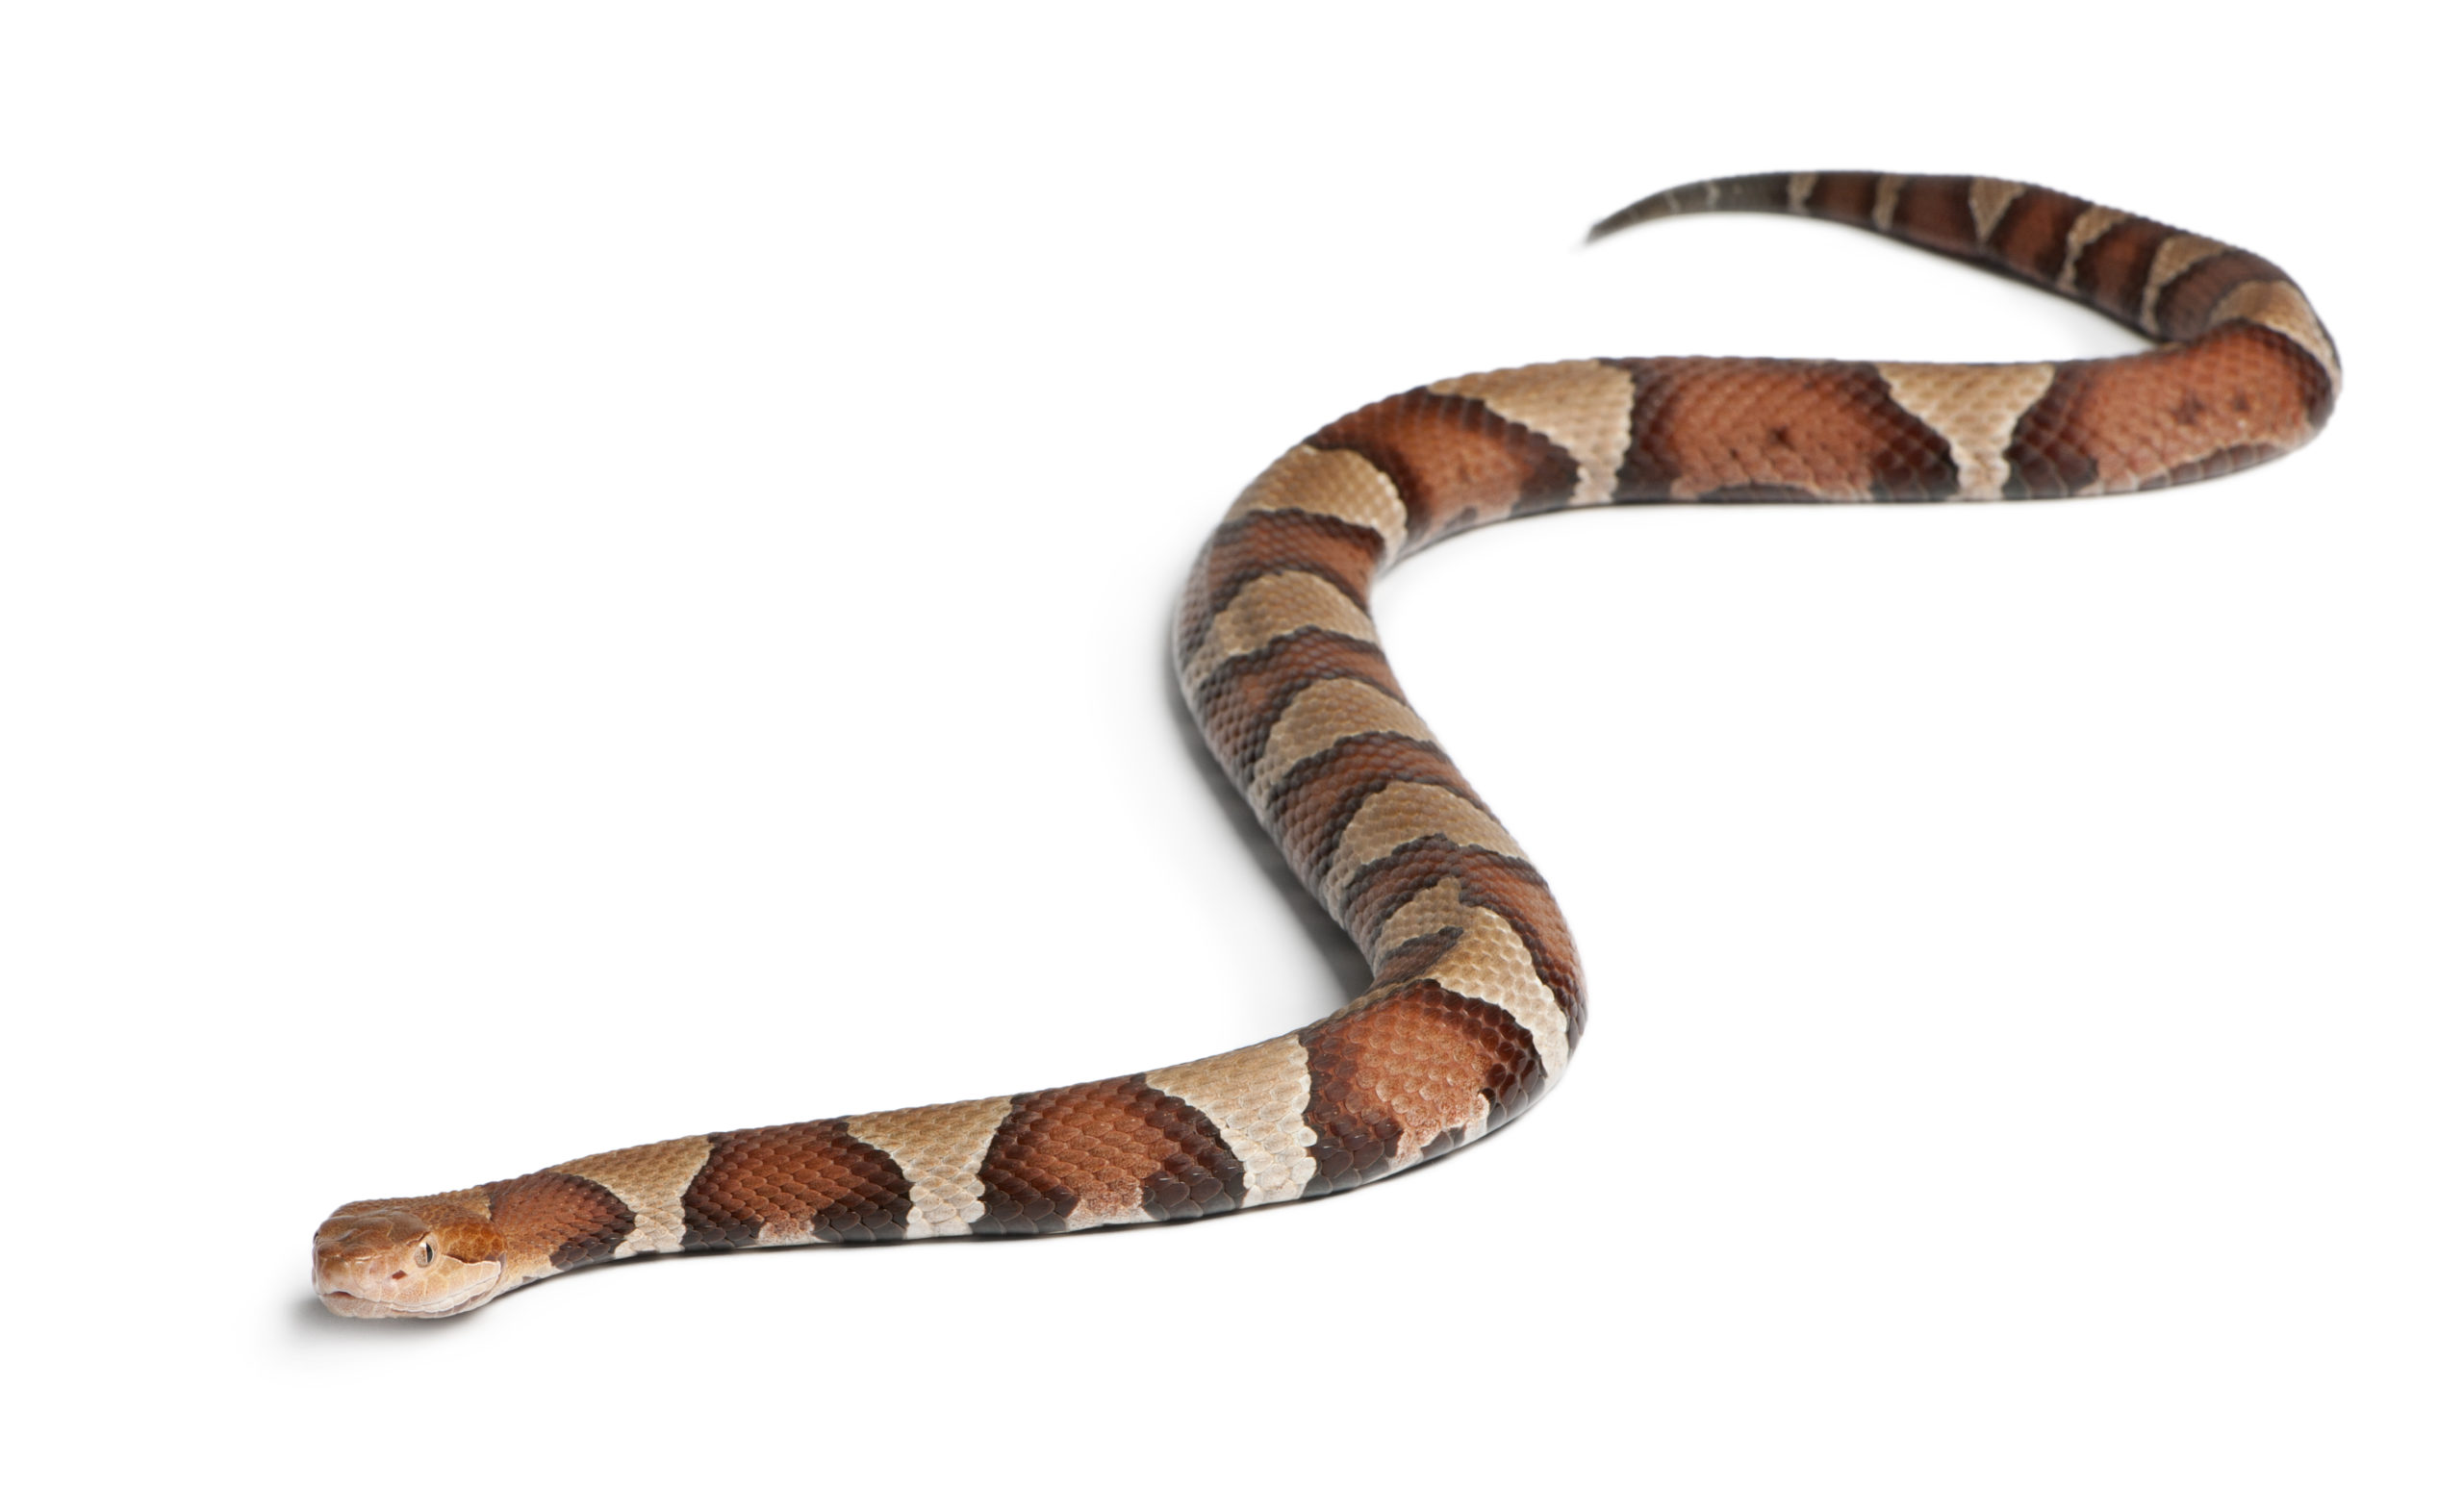 Copperhead snake or highland moccasin - Agkistrodon contortrix, poisonous, white background